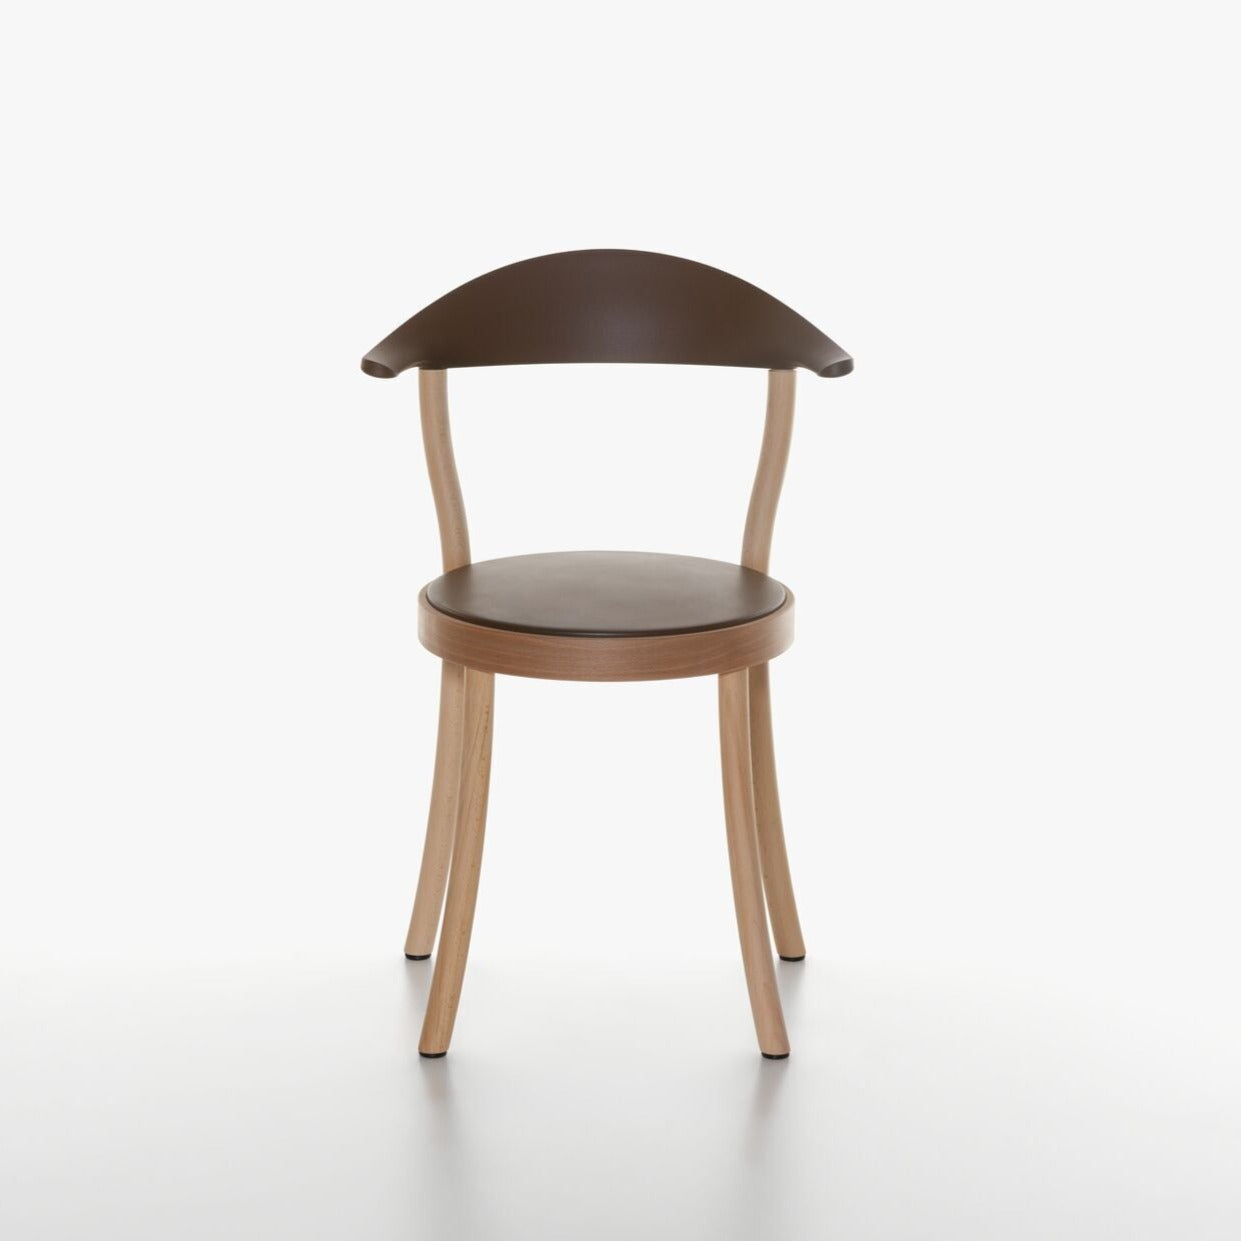 MONZA BISTRO Chair beech wood frame-black seat and backrest-front view